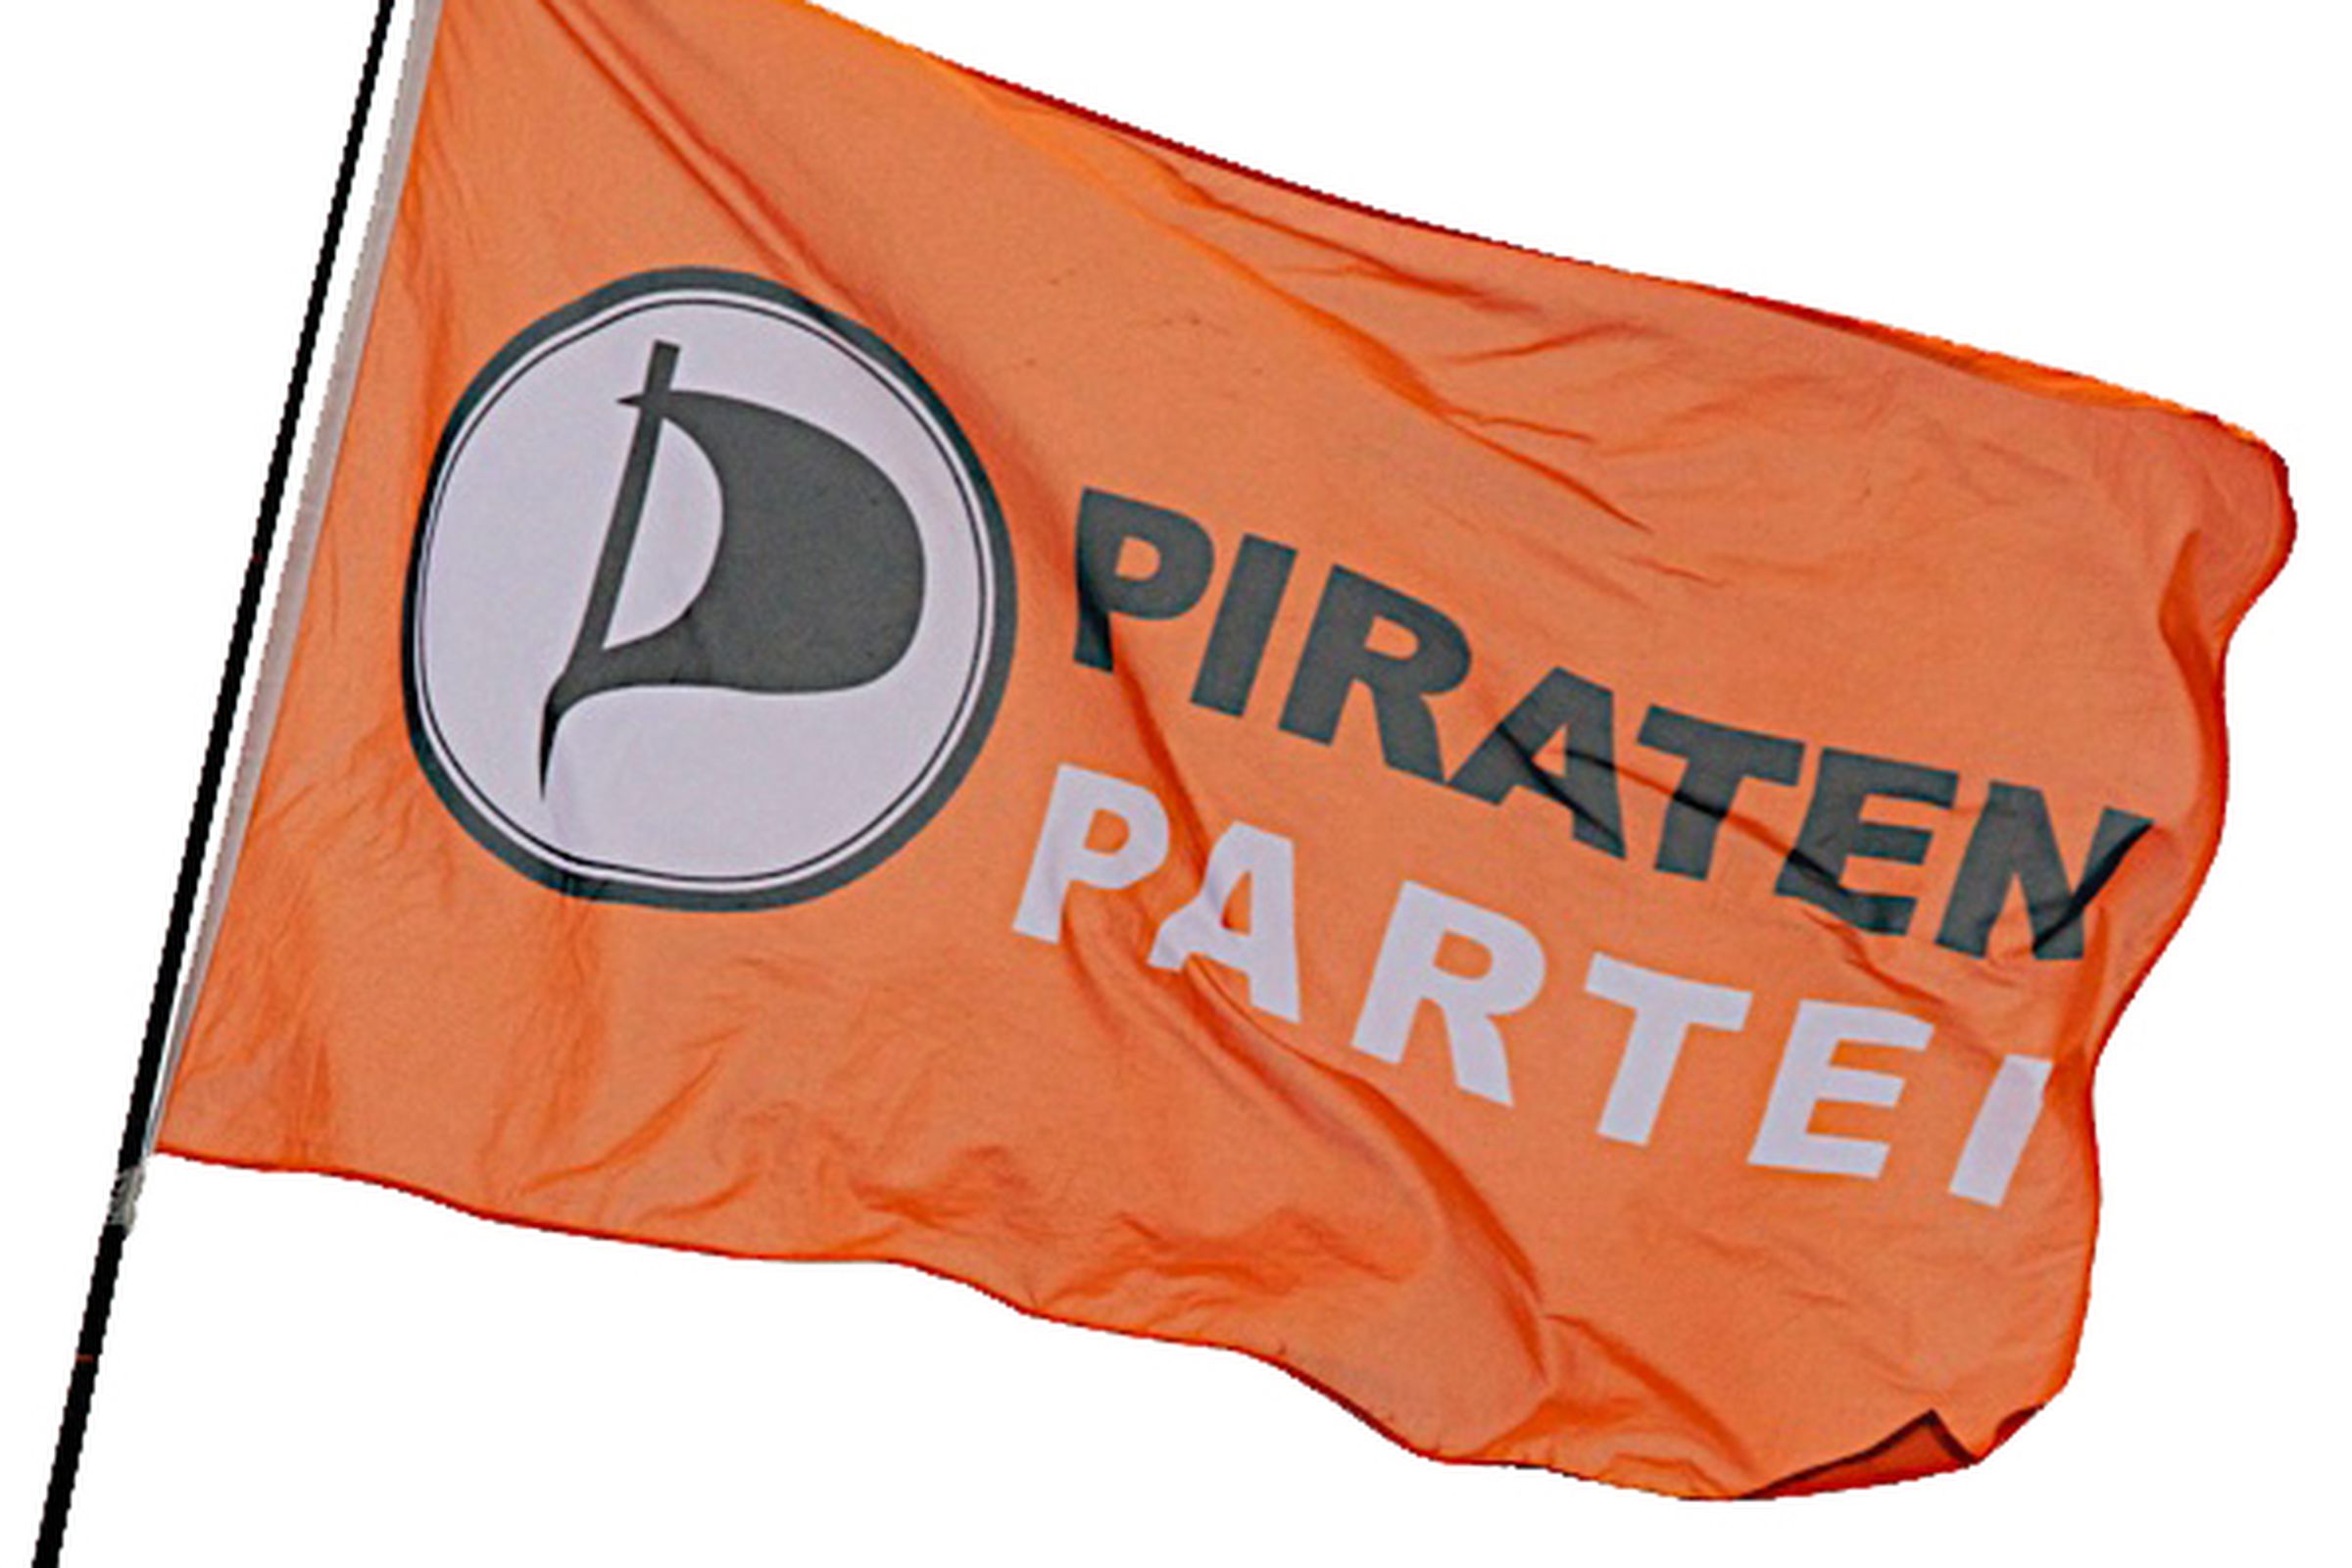 Flickr | German Pirate Party logo